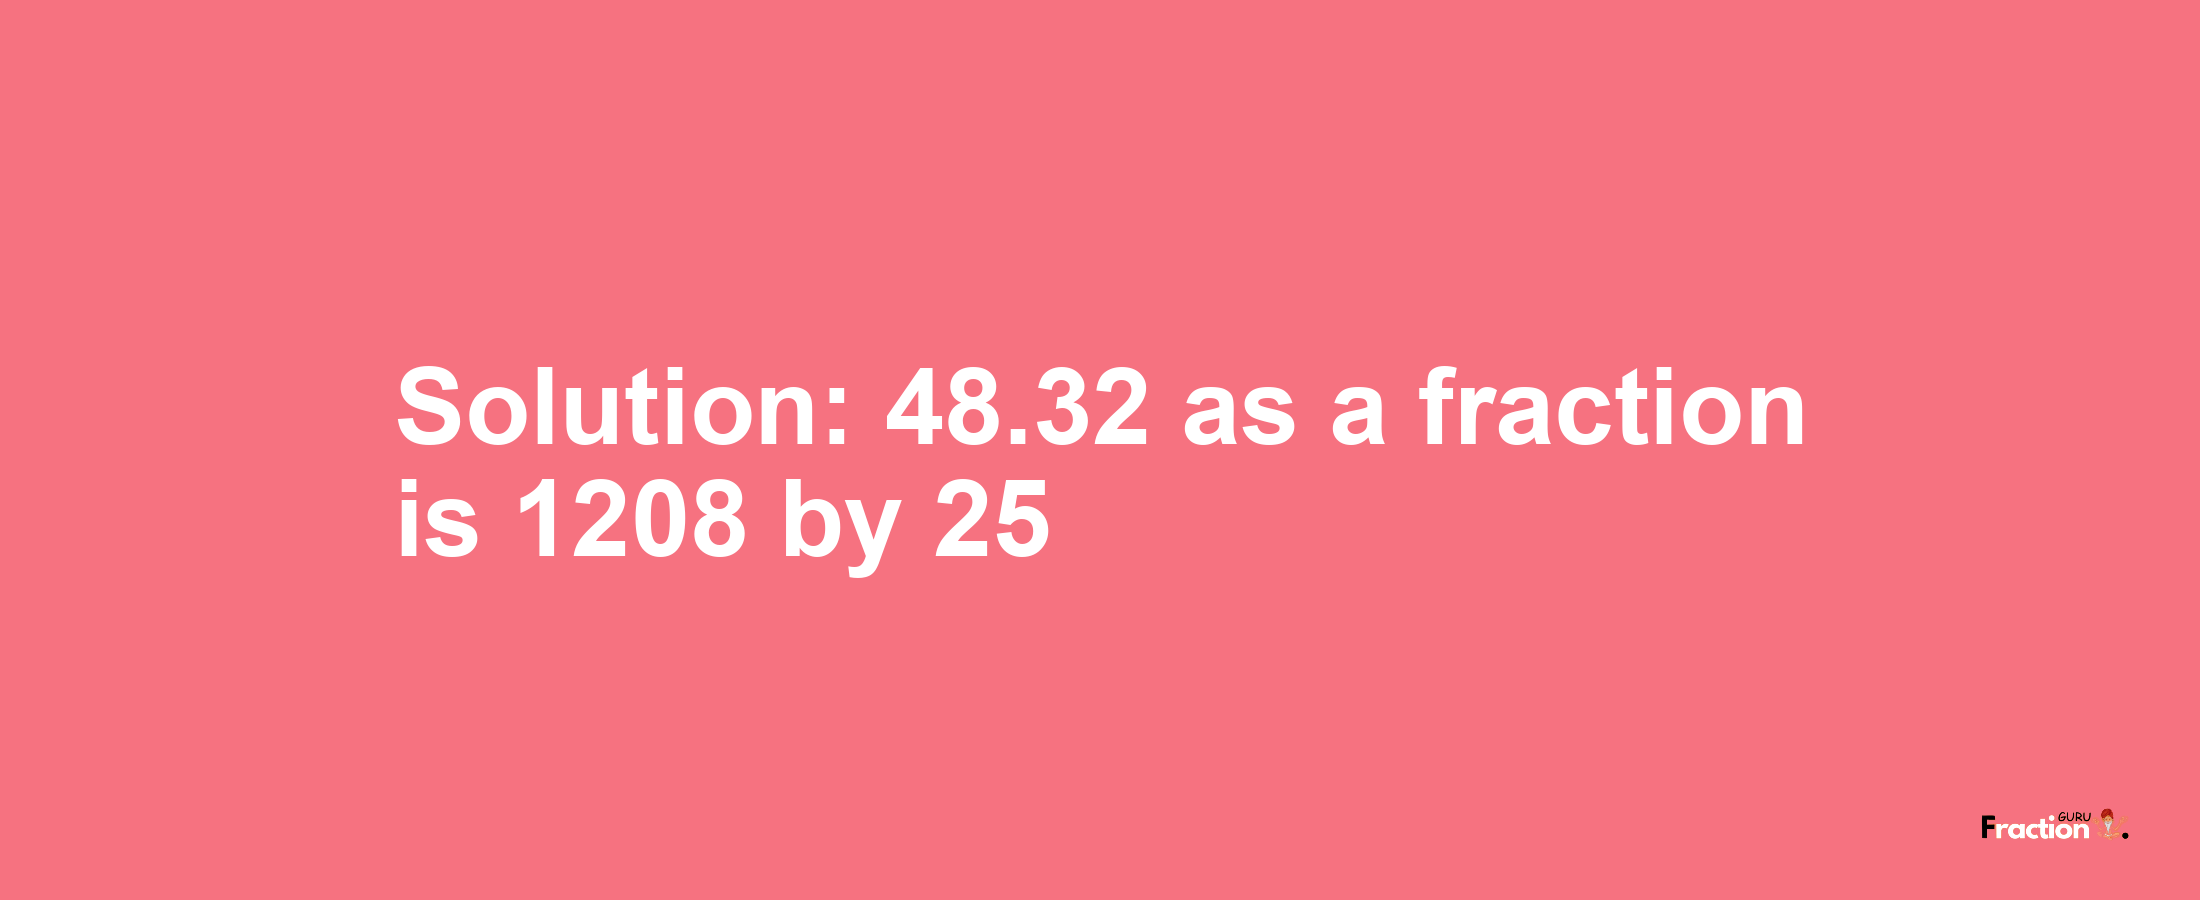 Solution:48.32 as a fraction is 1208/25